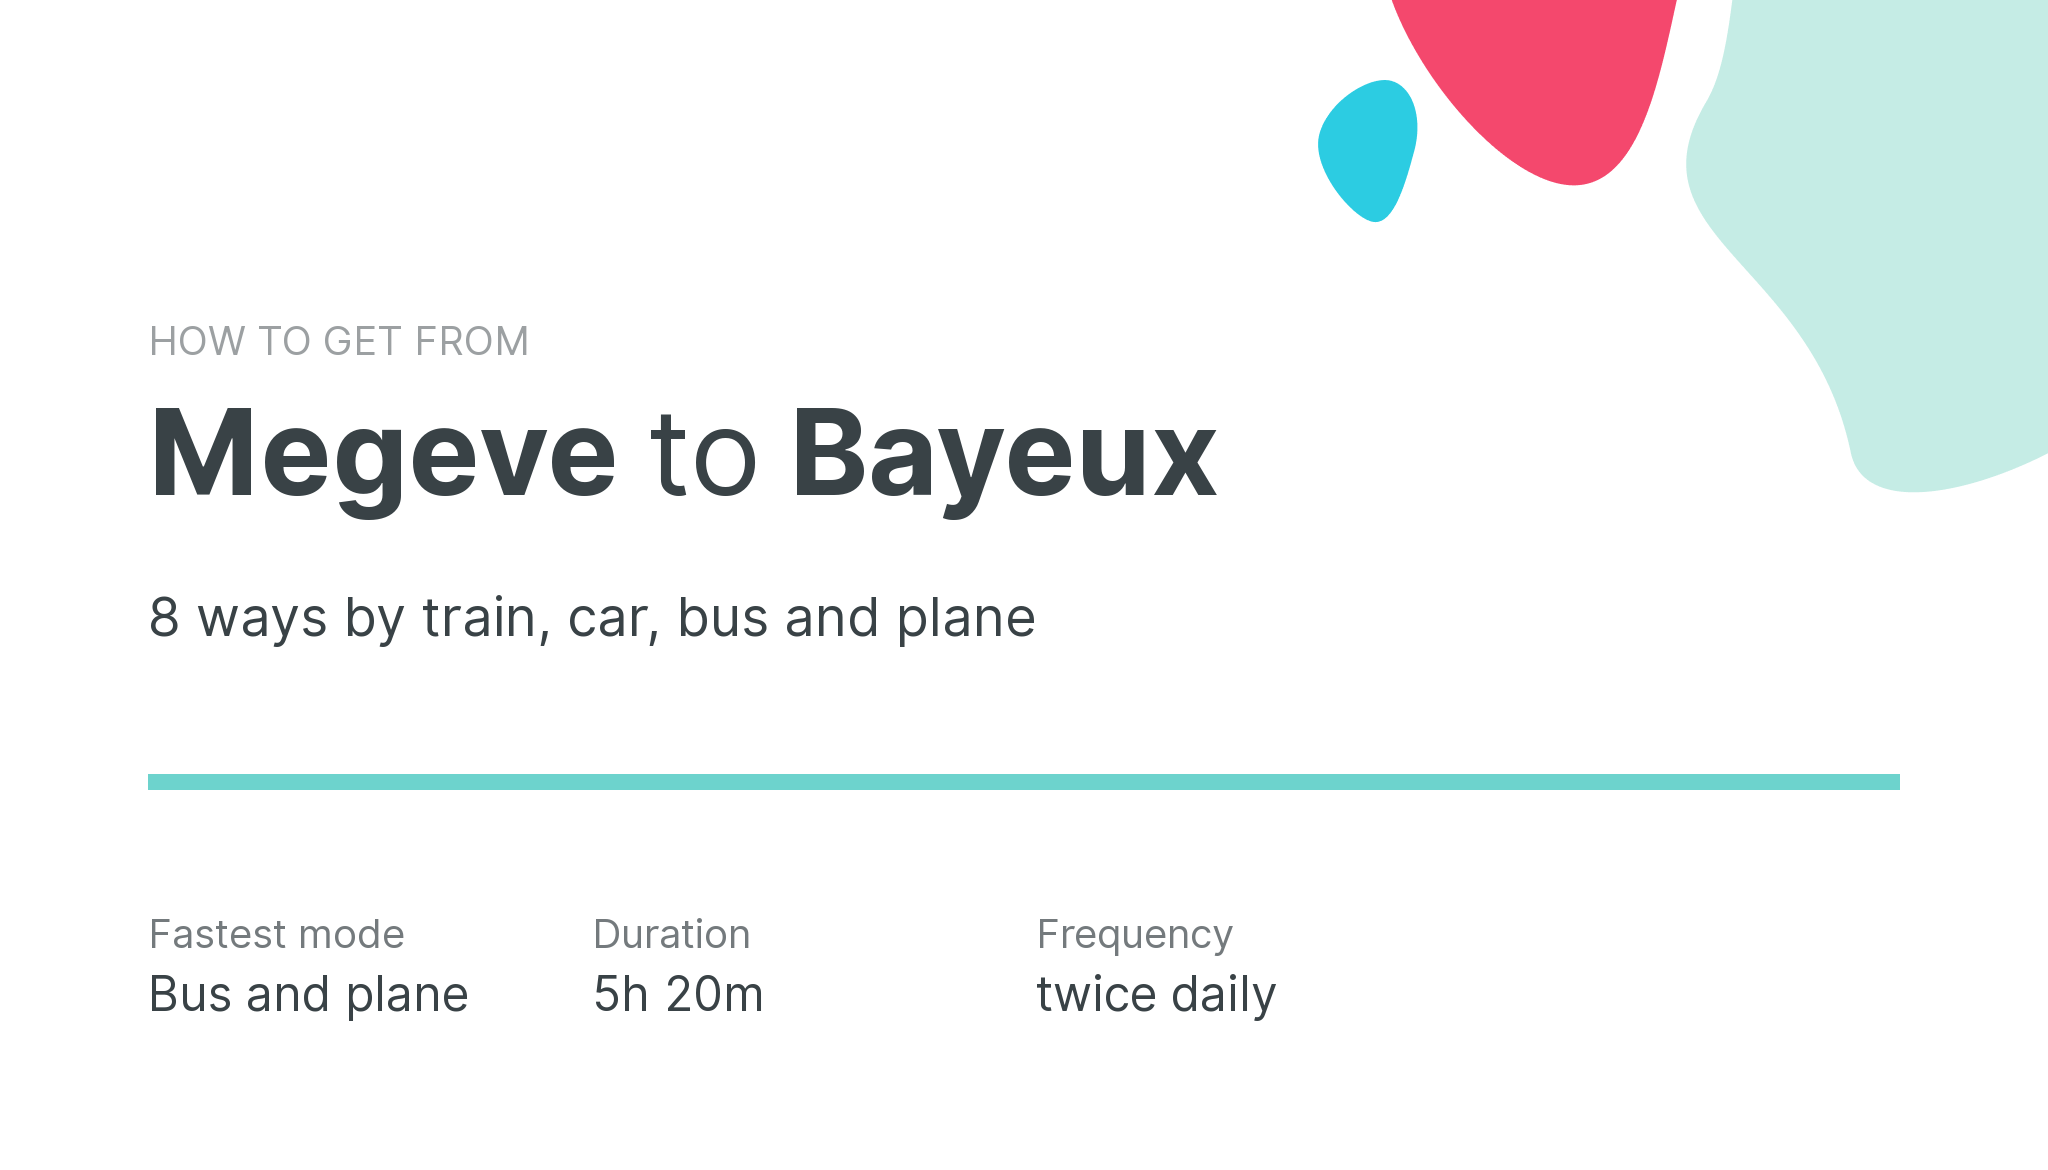 How do I get from Megeve to Bayeux